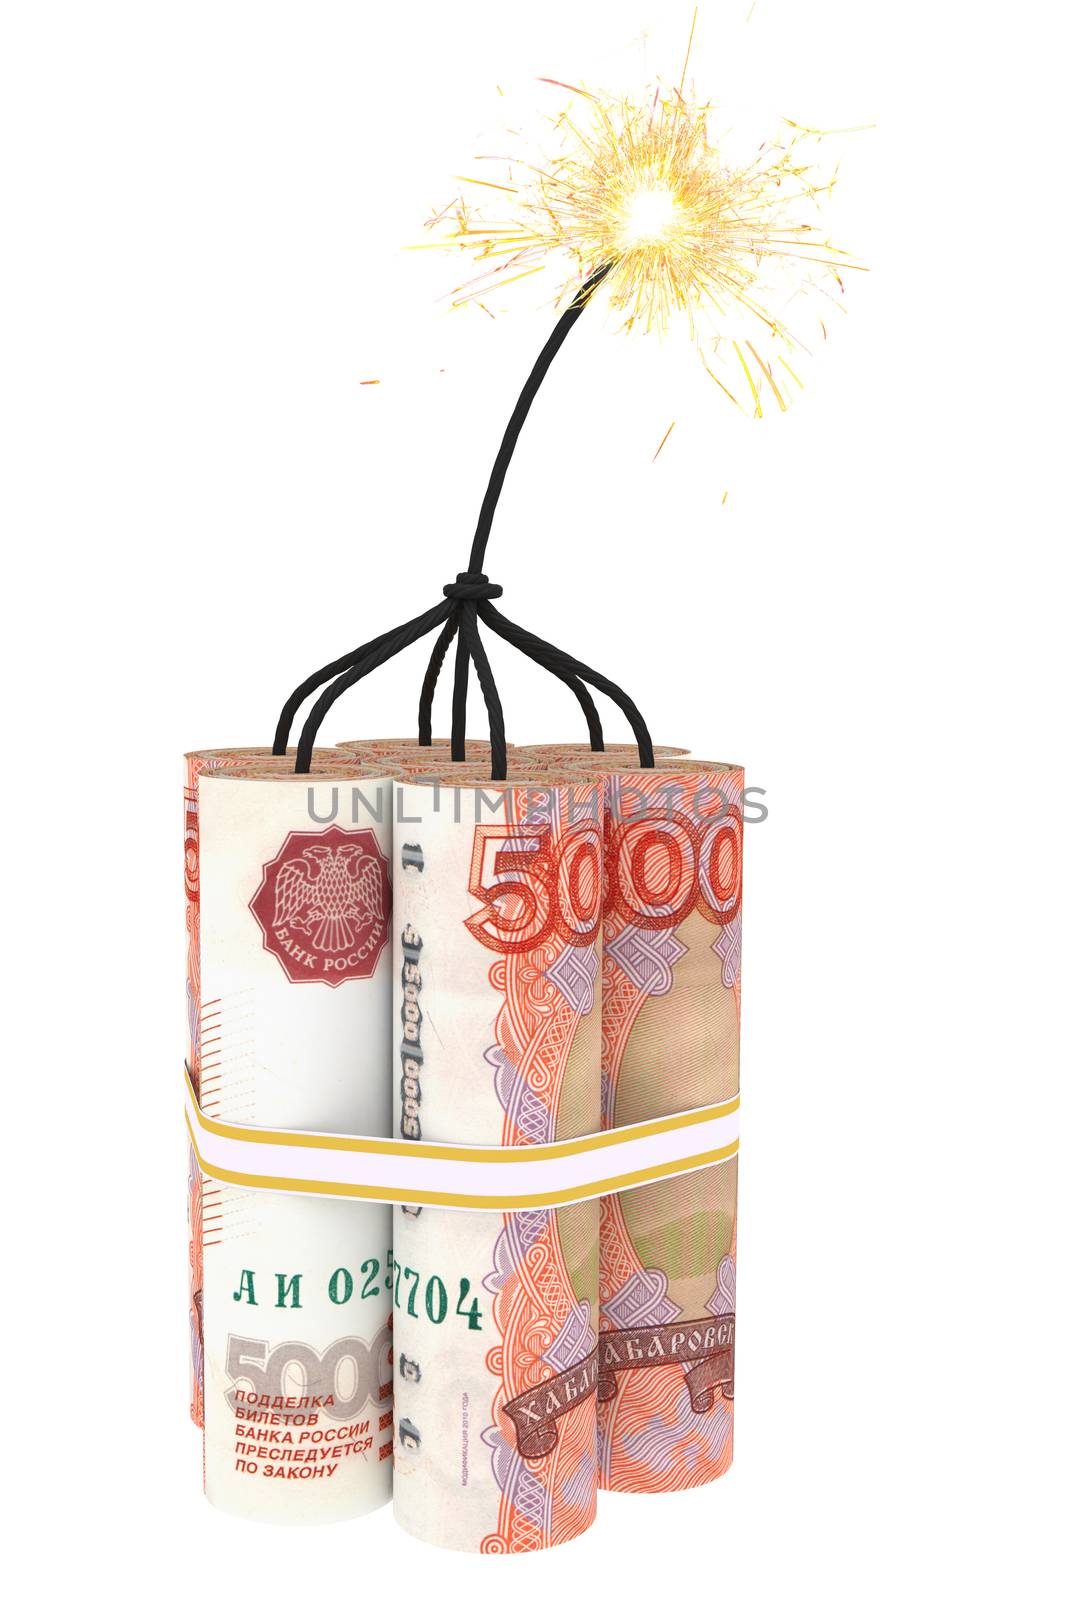 Dynamite composed of ruble bills with a burning wick by oneo